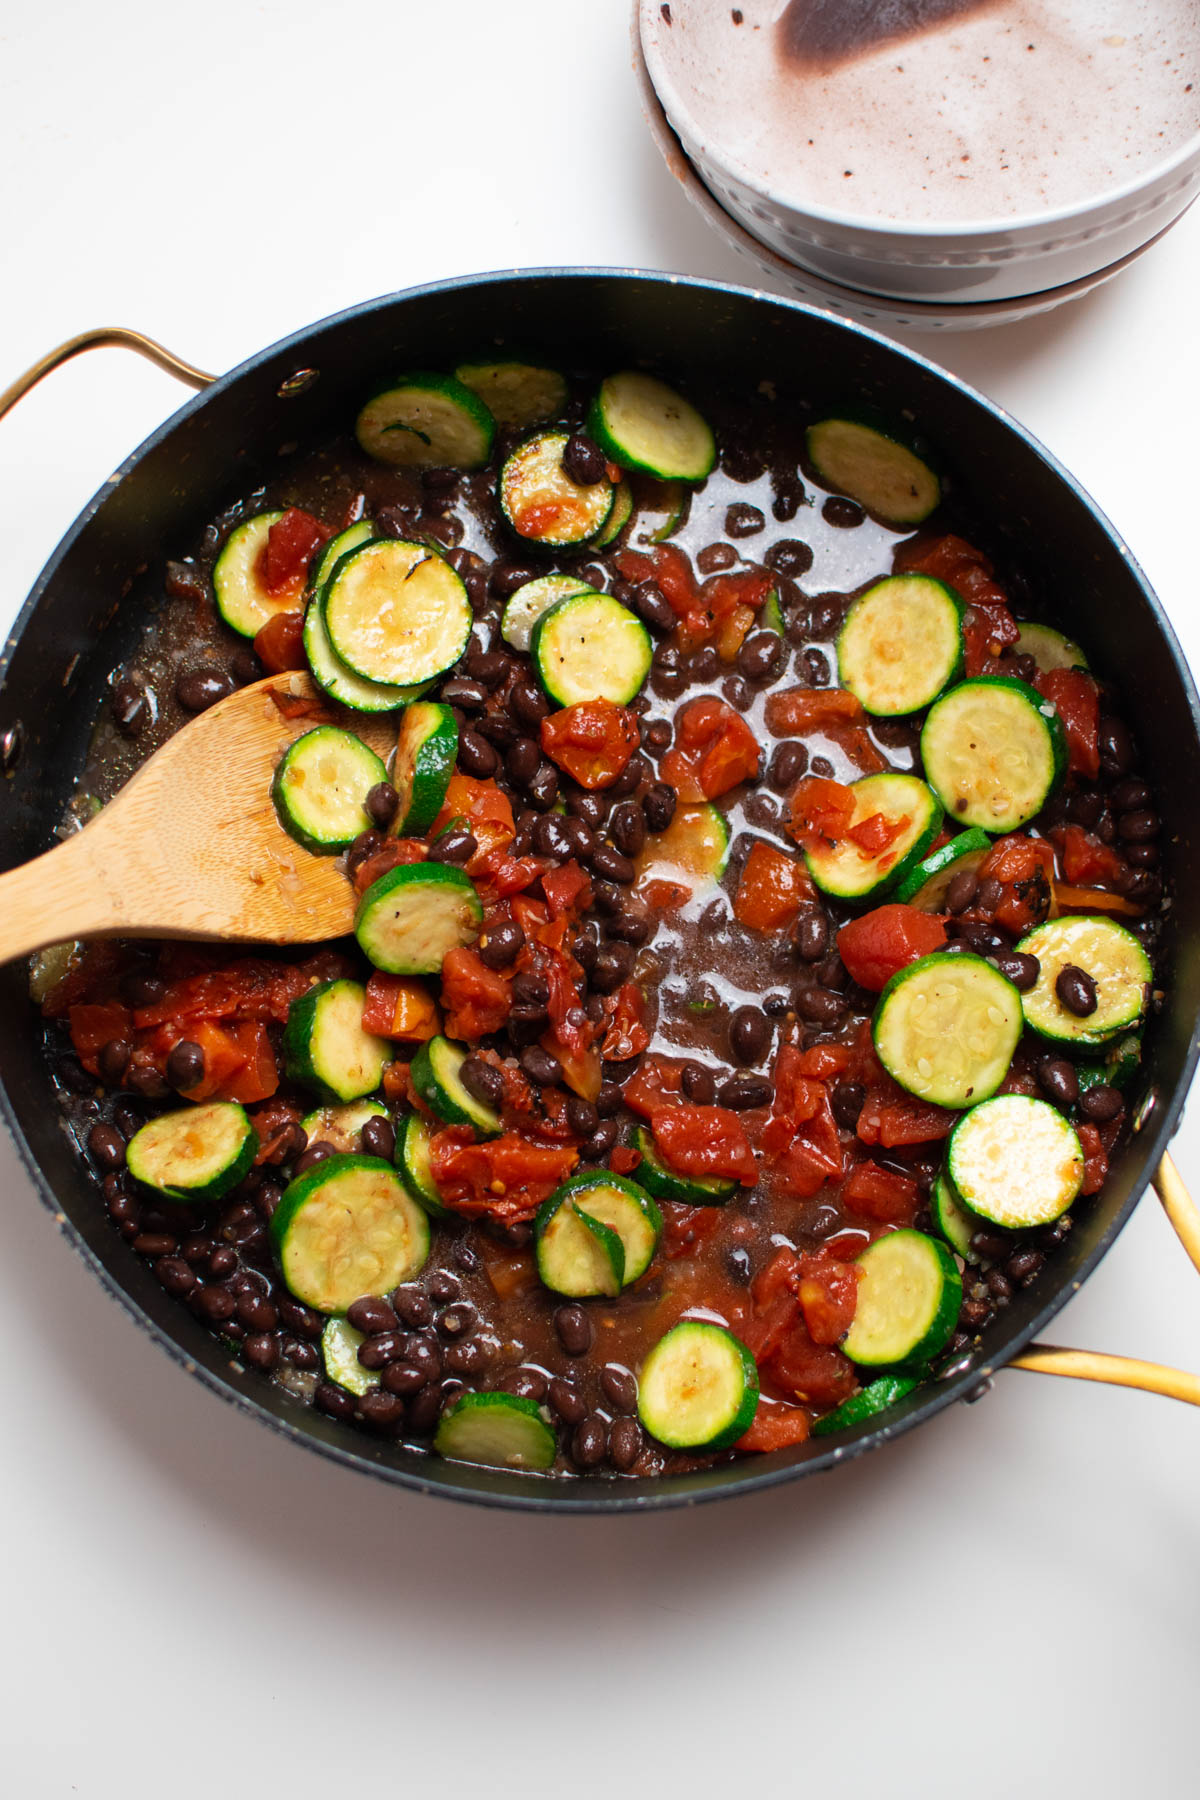 Zucchini, tomatoes, and black beans in large black skillet with wooded spoon.